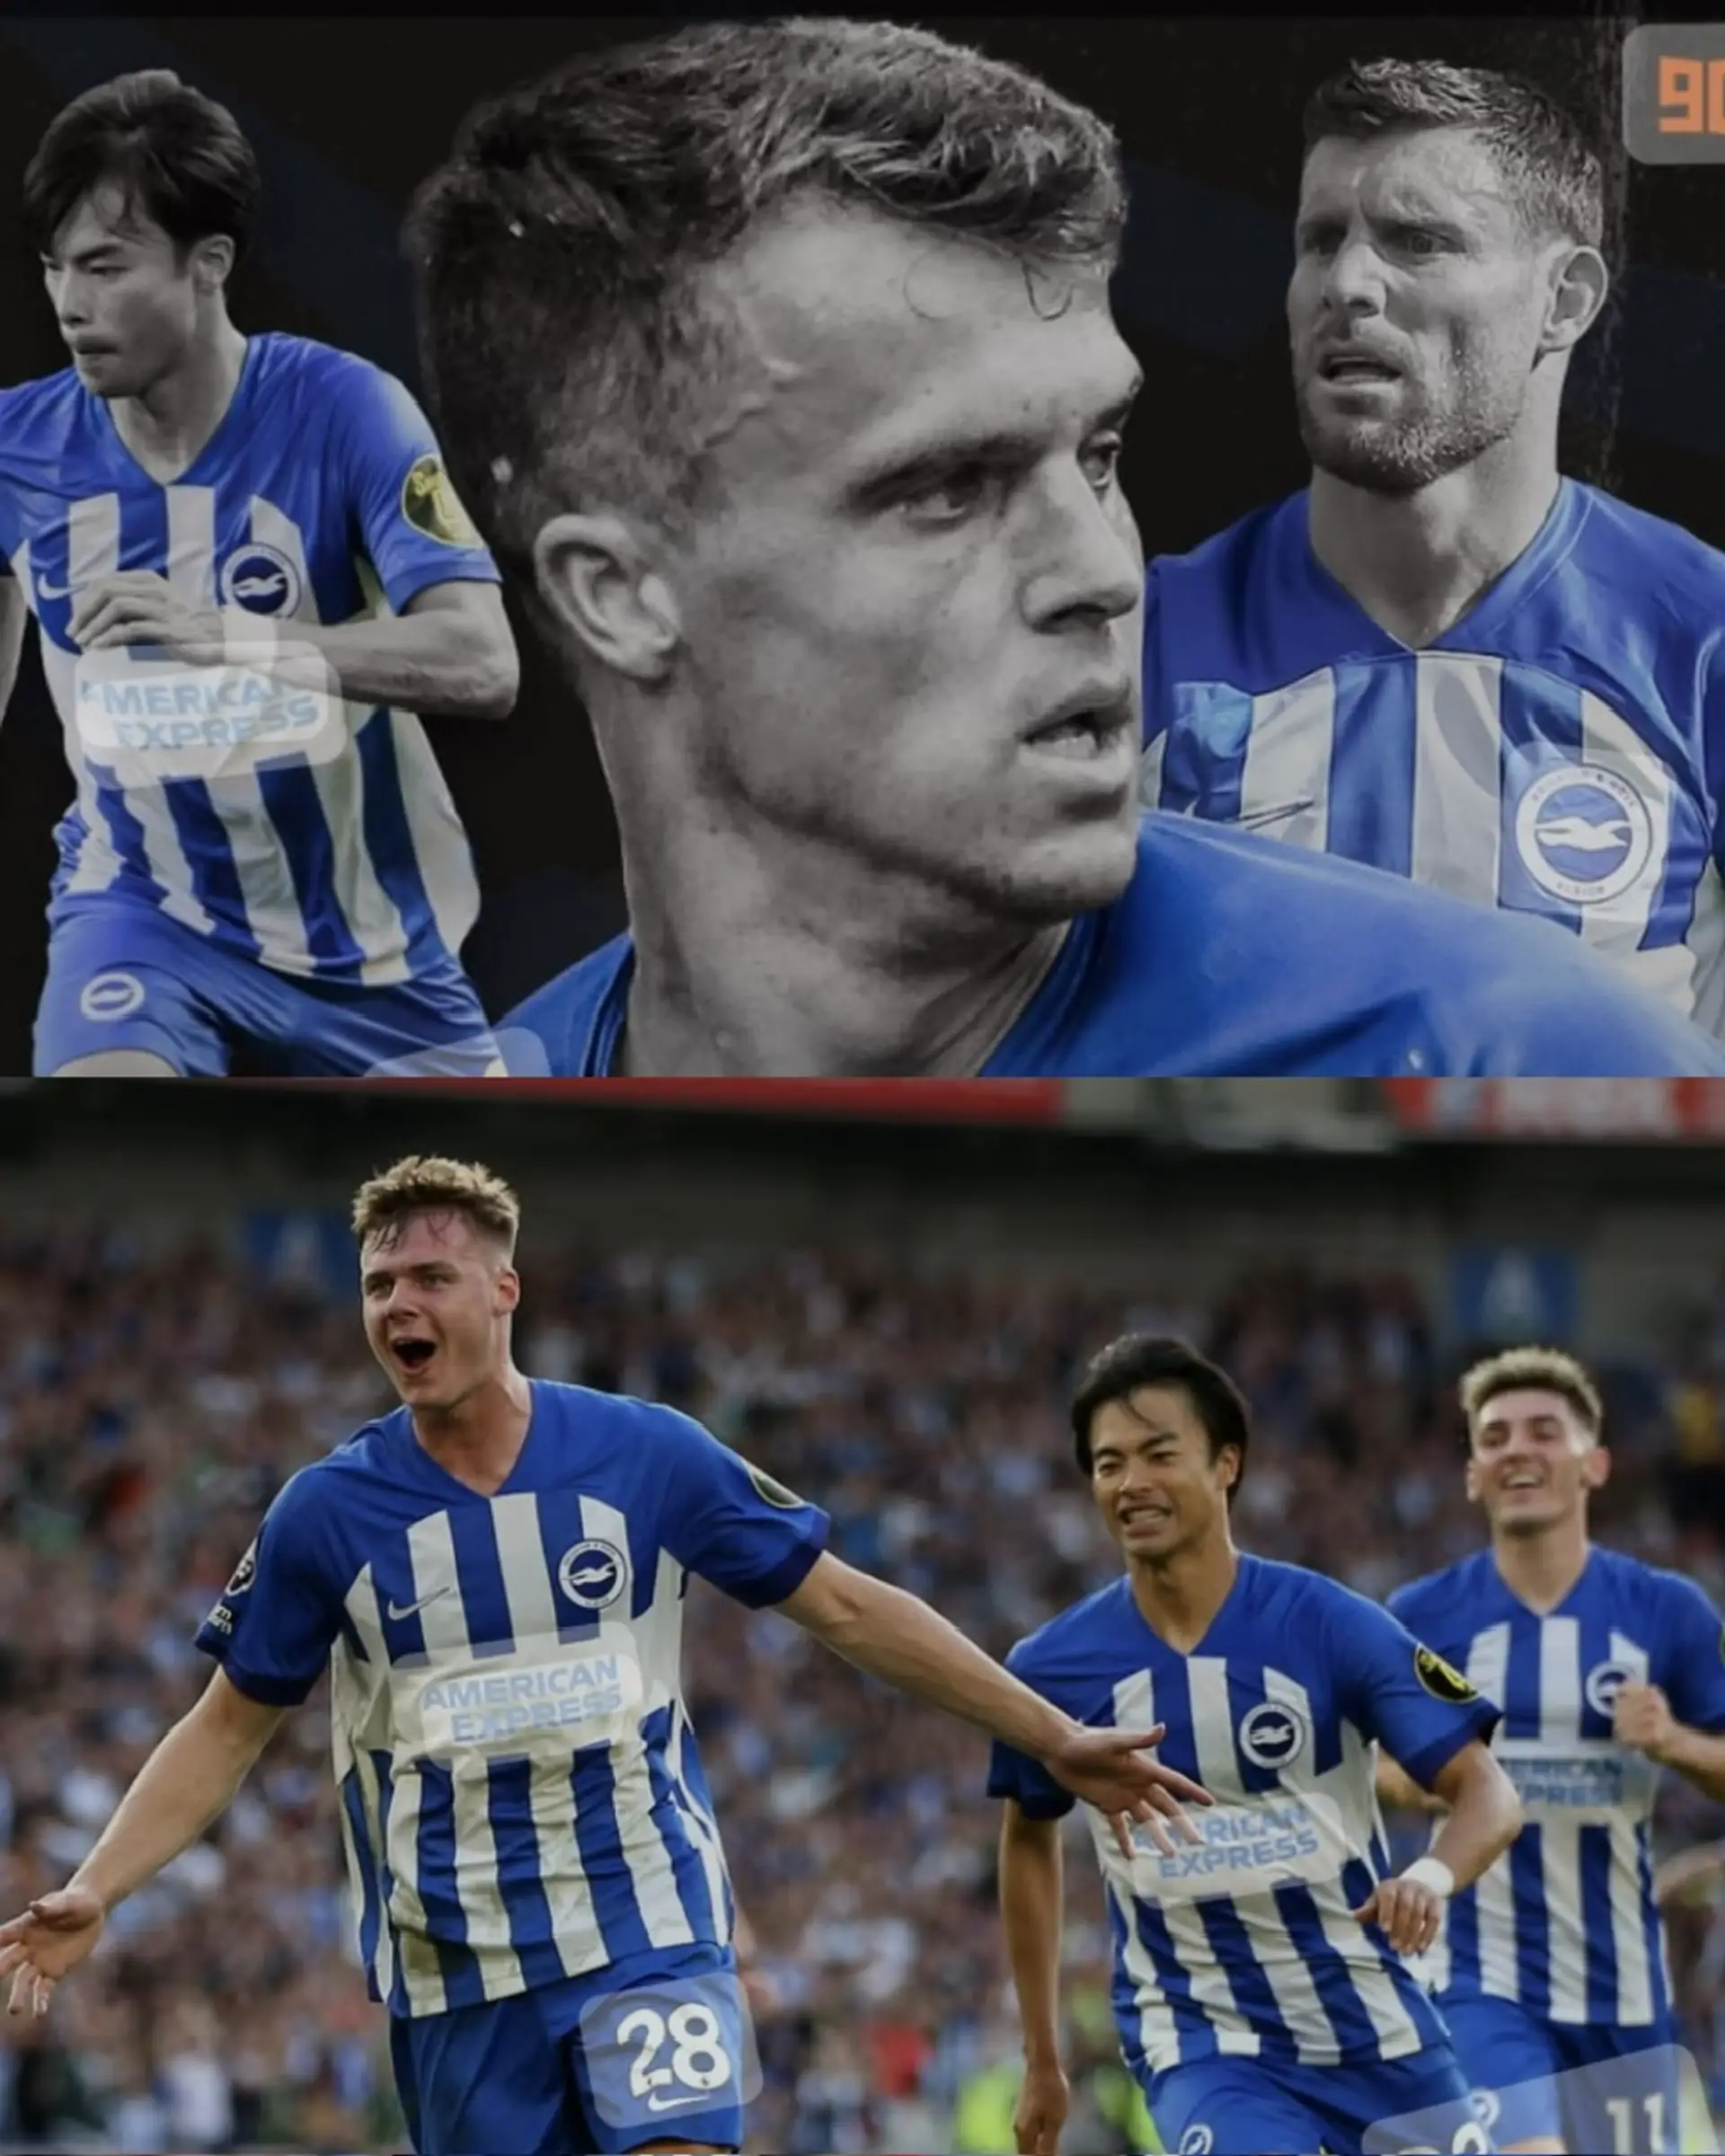 Brighton & Hove Albion: The English Academy of Football Dynasty